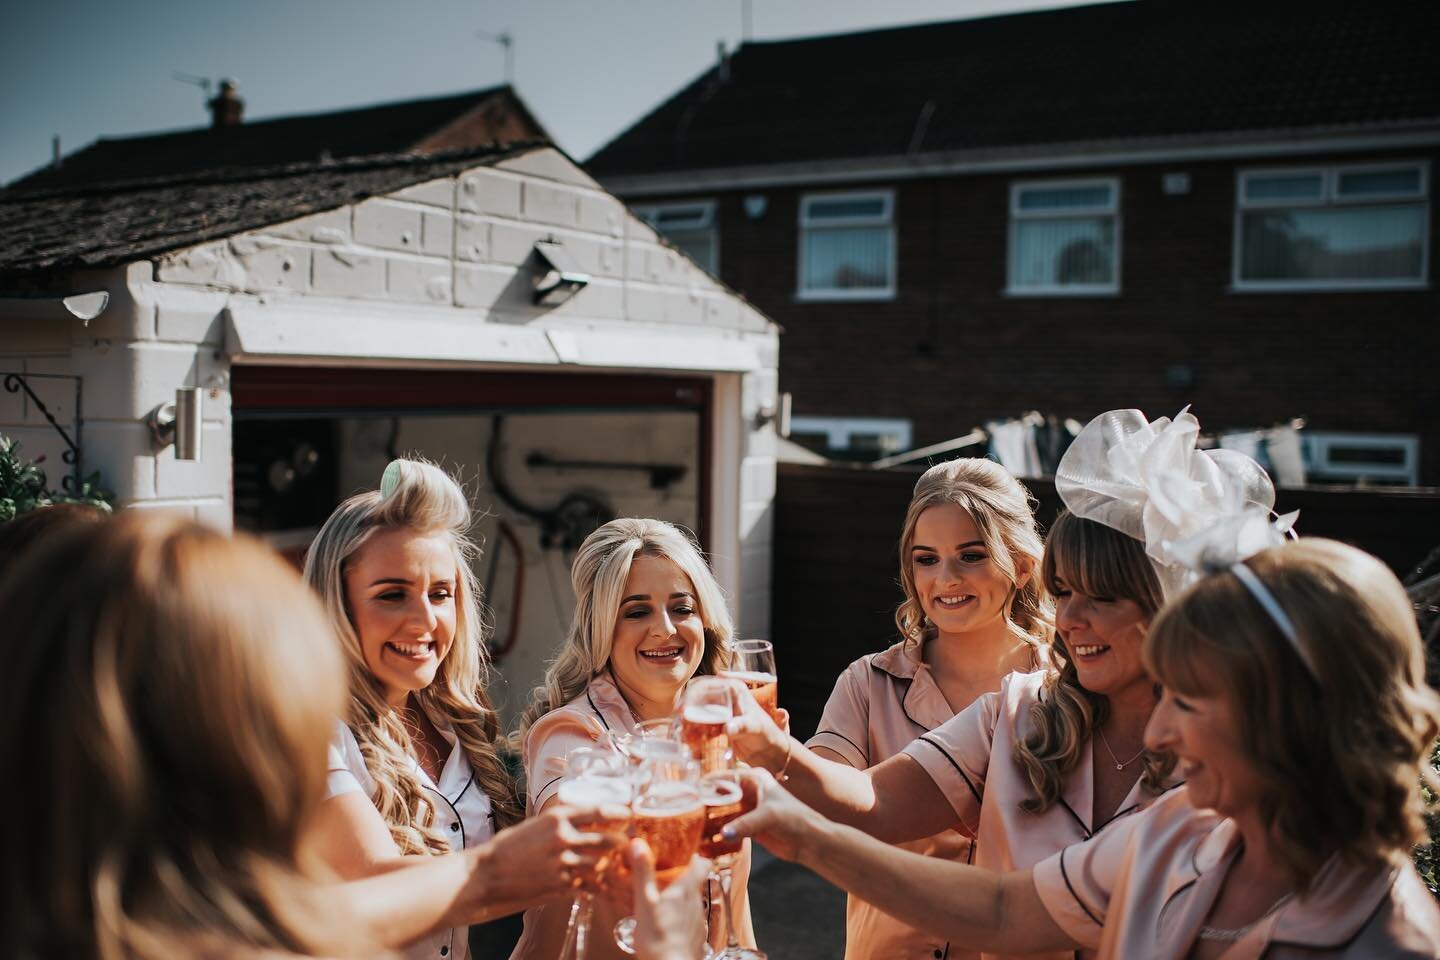 This time last week 🌟&hearts;️ 💍 
&bull;

Planning to get married 2020, 2021 or 2022? Get in touch for booking availability, message me for more details, don&rsquo;t miss out!

&bull;
#bride2021 #imgettingmarried2021
#rusticwedding #2021bride  #202